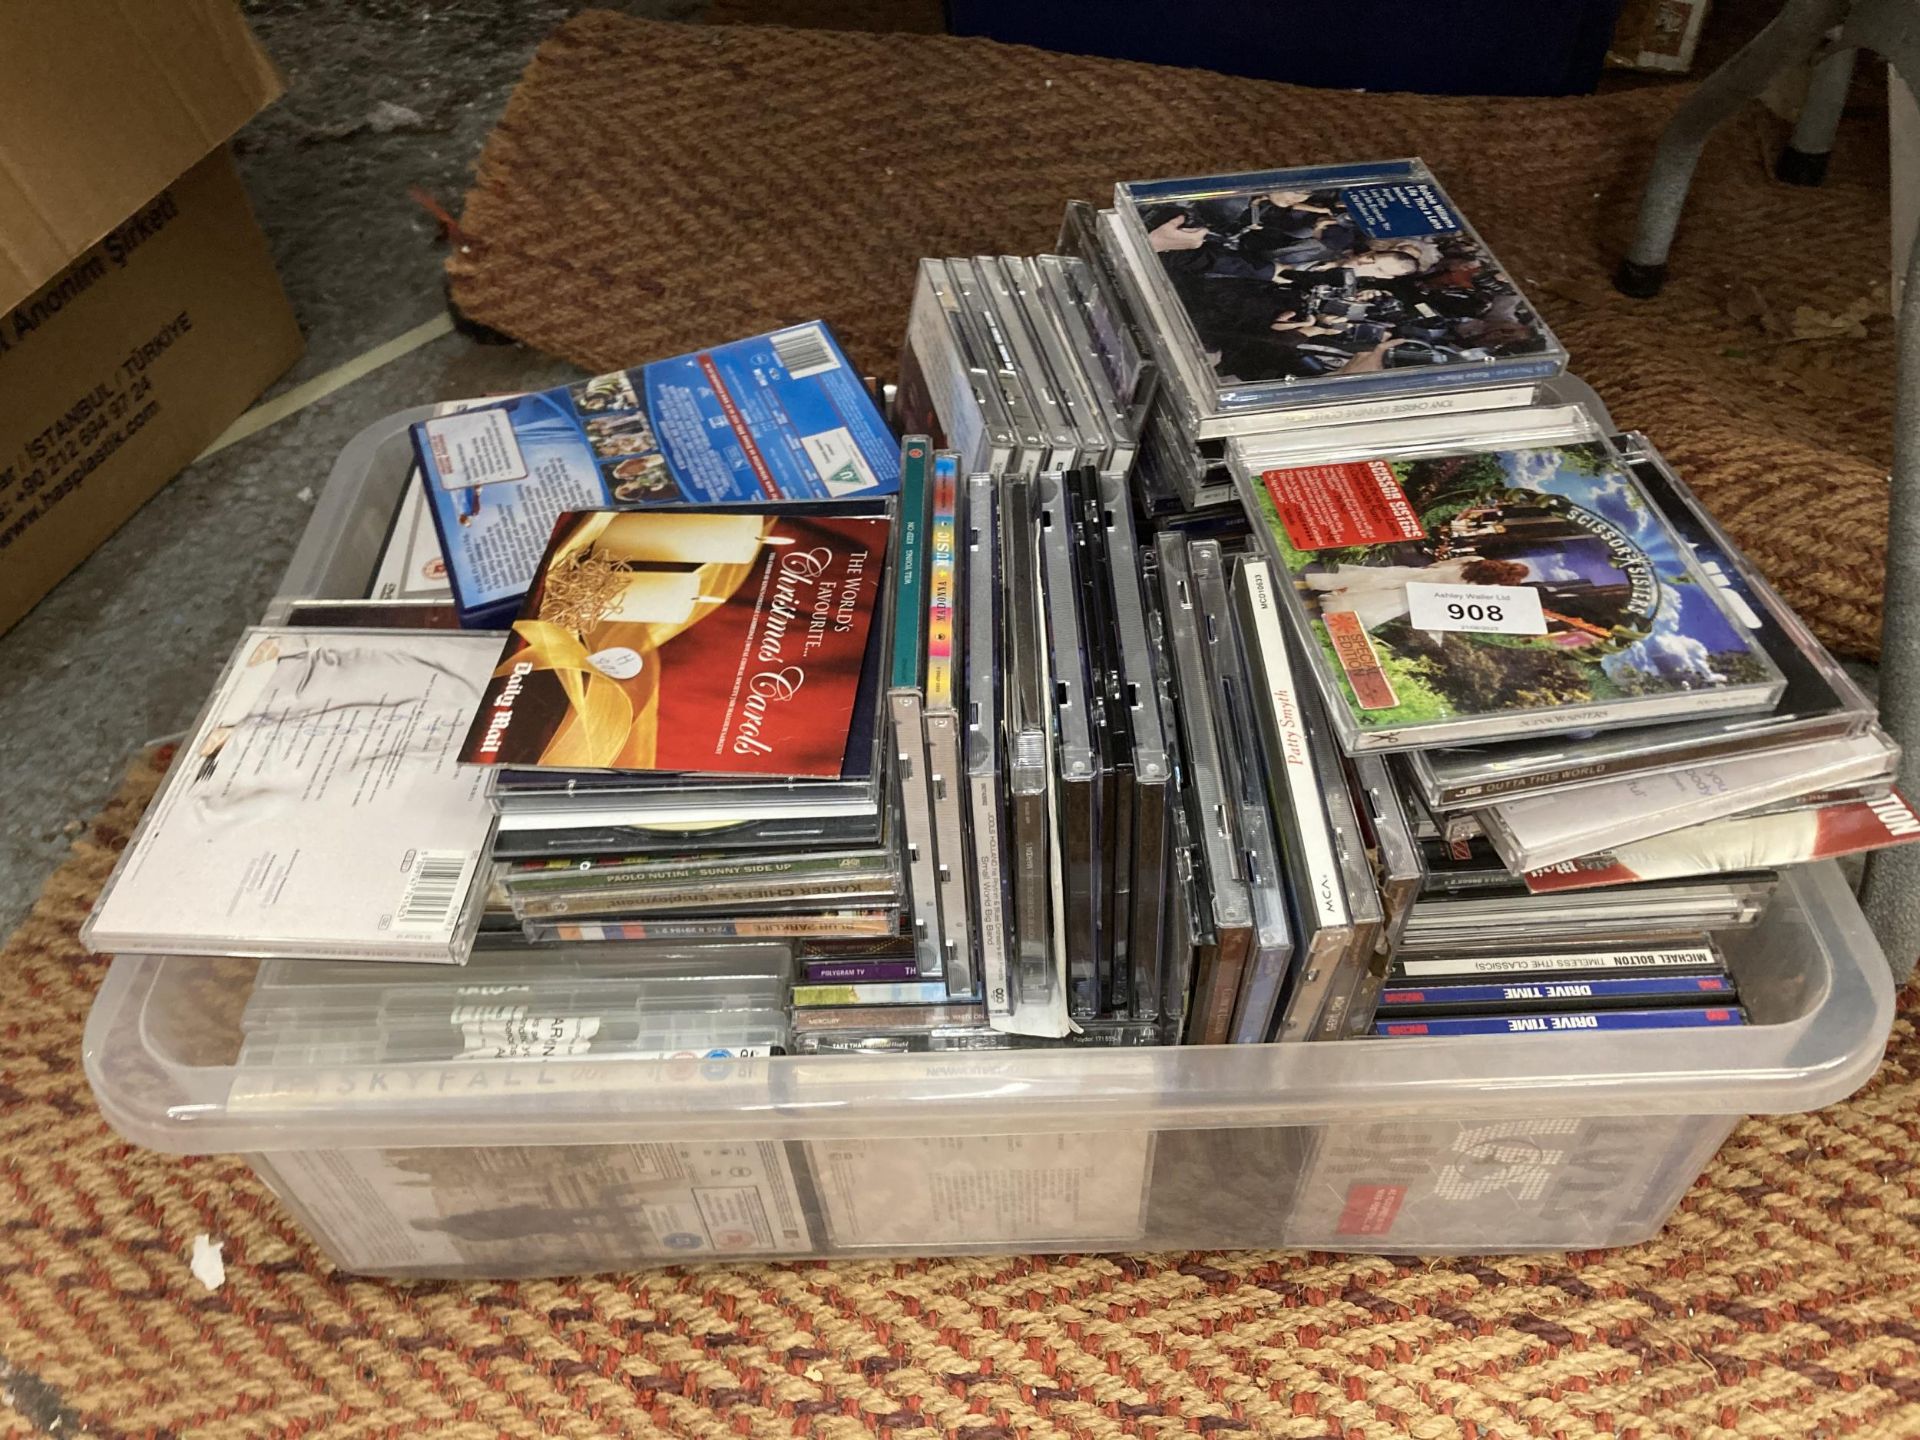 A LARGE QUANTITY OF DVD'S AND CD'S